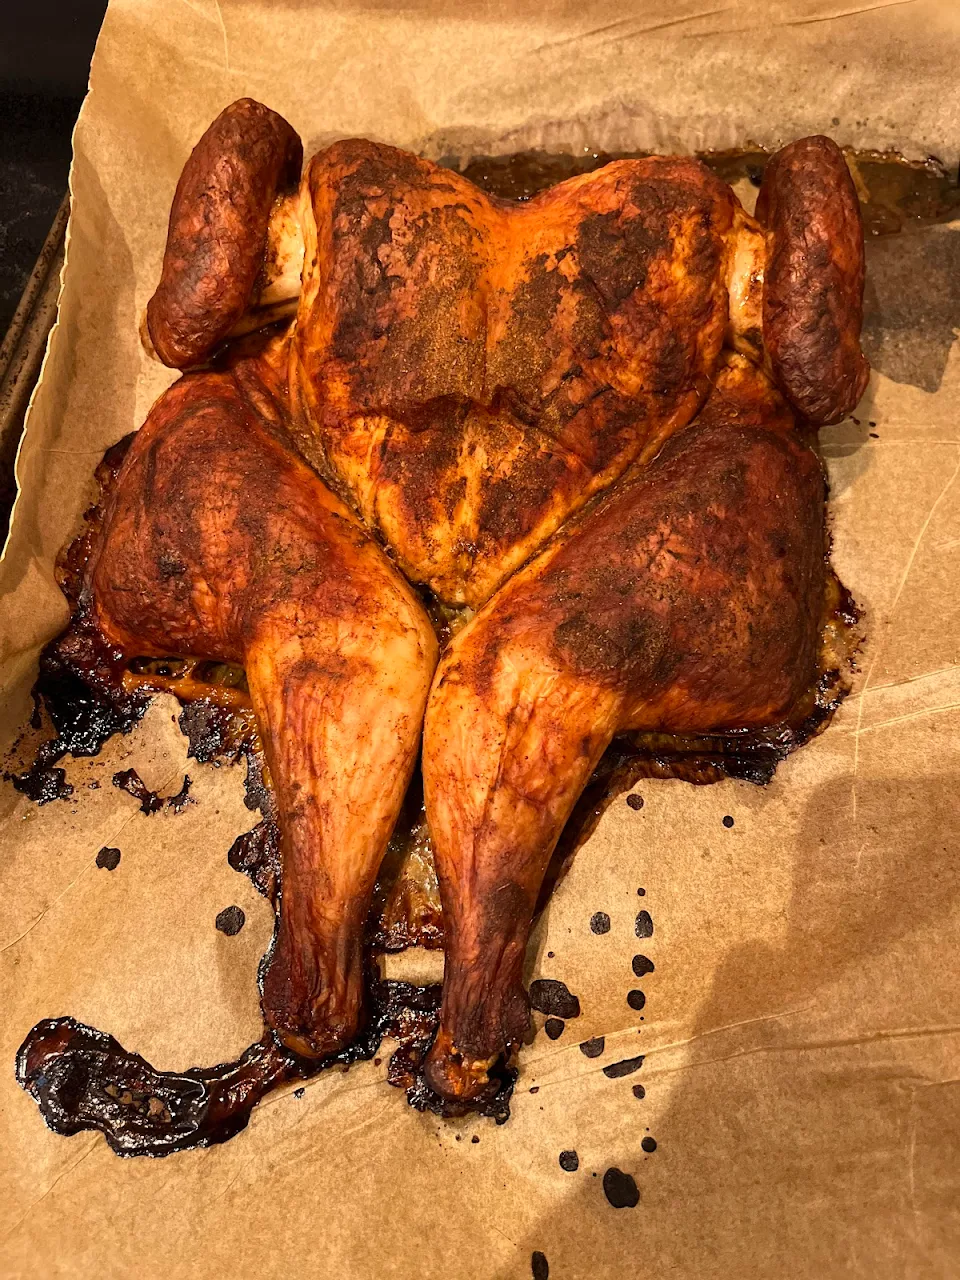 My chicken giving me Kim K vibes.